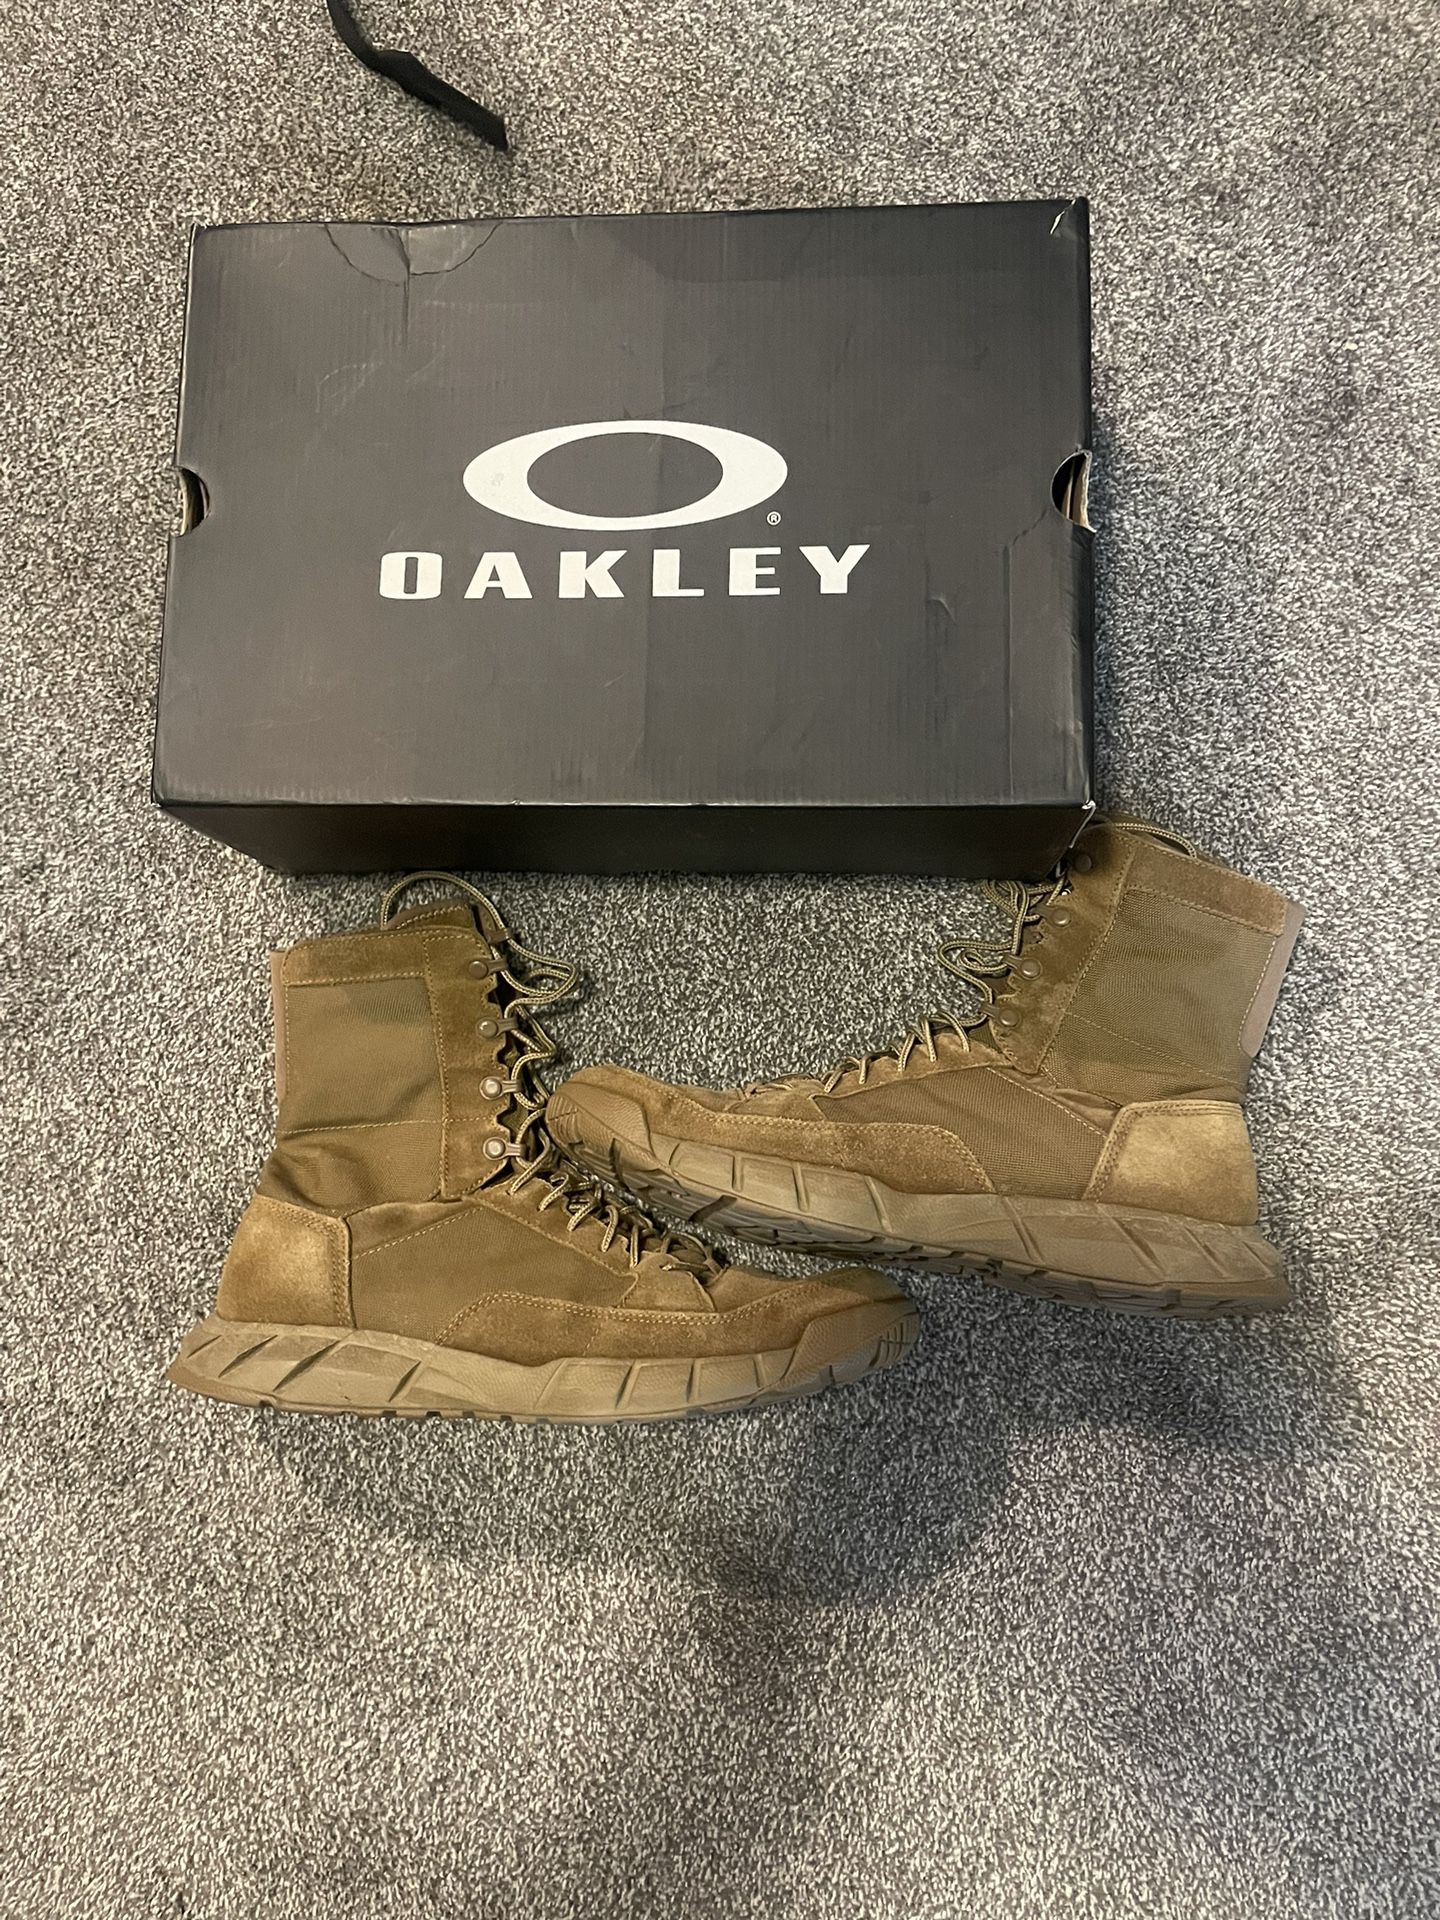 Oakley military boots